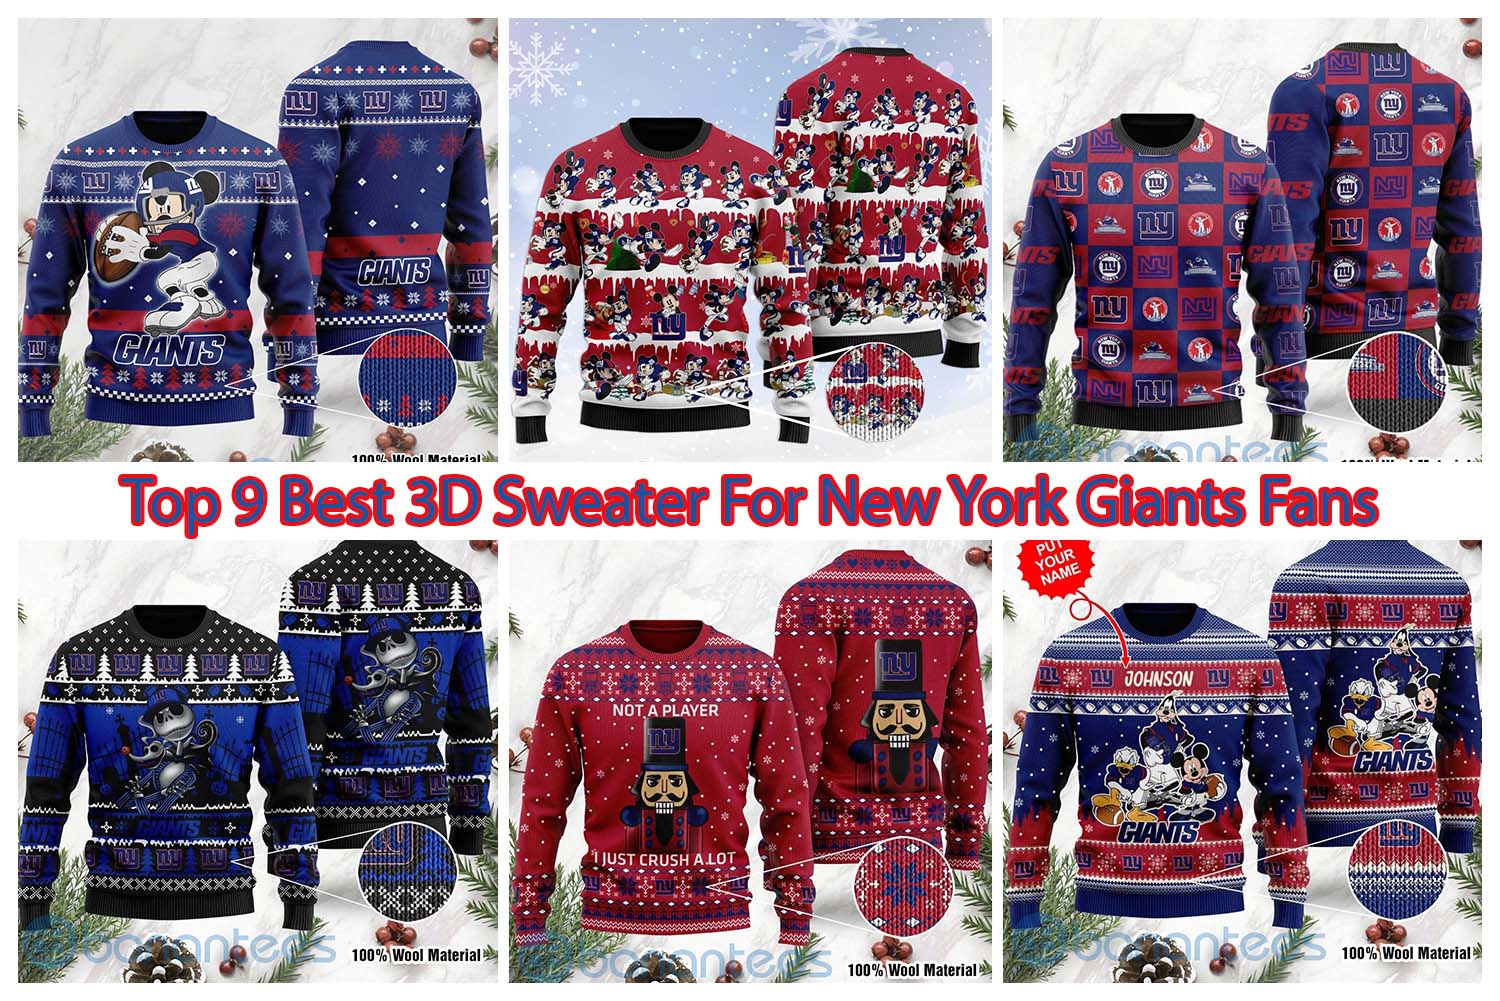 Top 9 Best 3D Sweater For New York Giants Fans